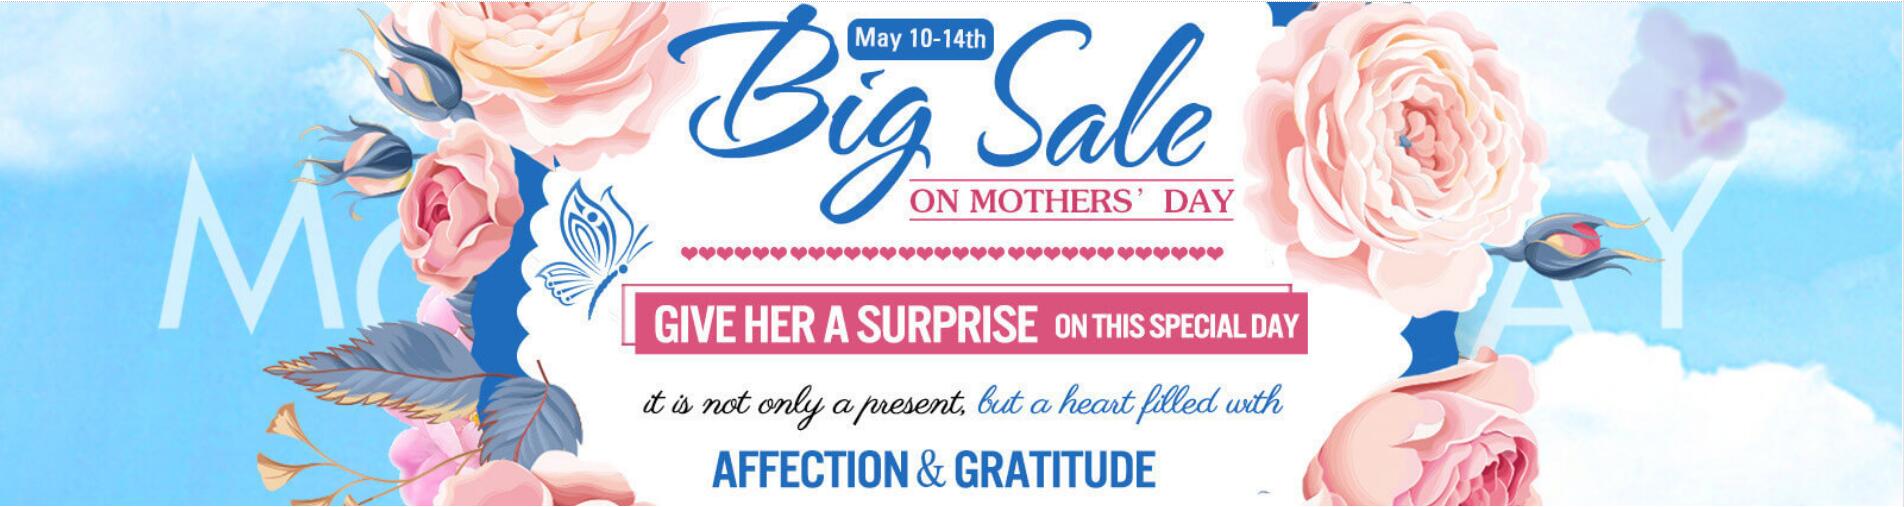 mothers' day promotion-03